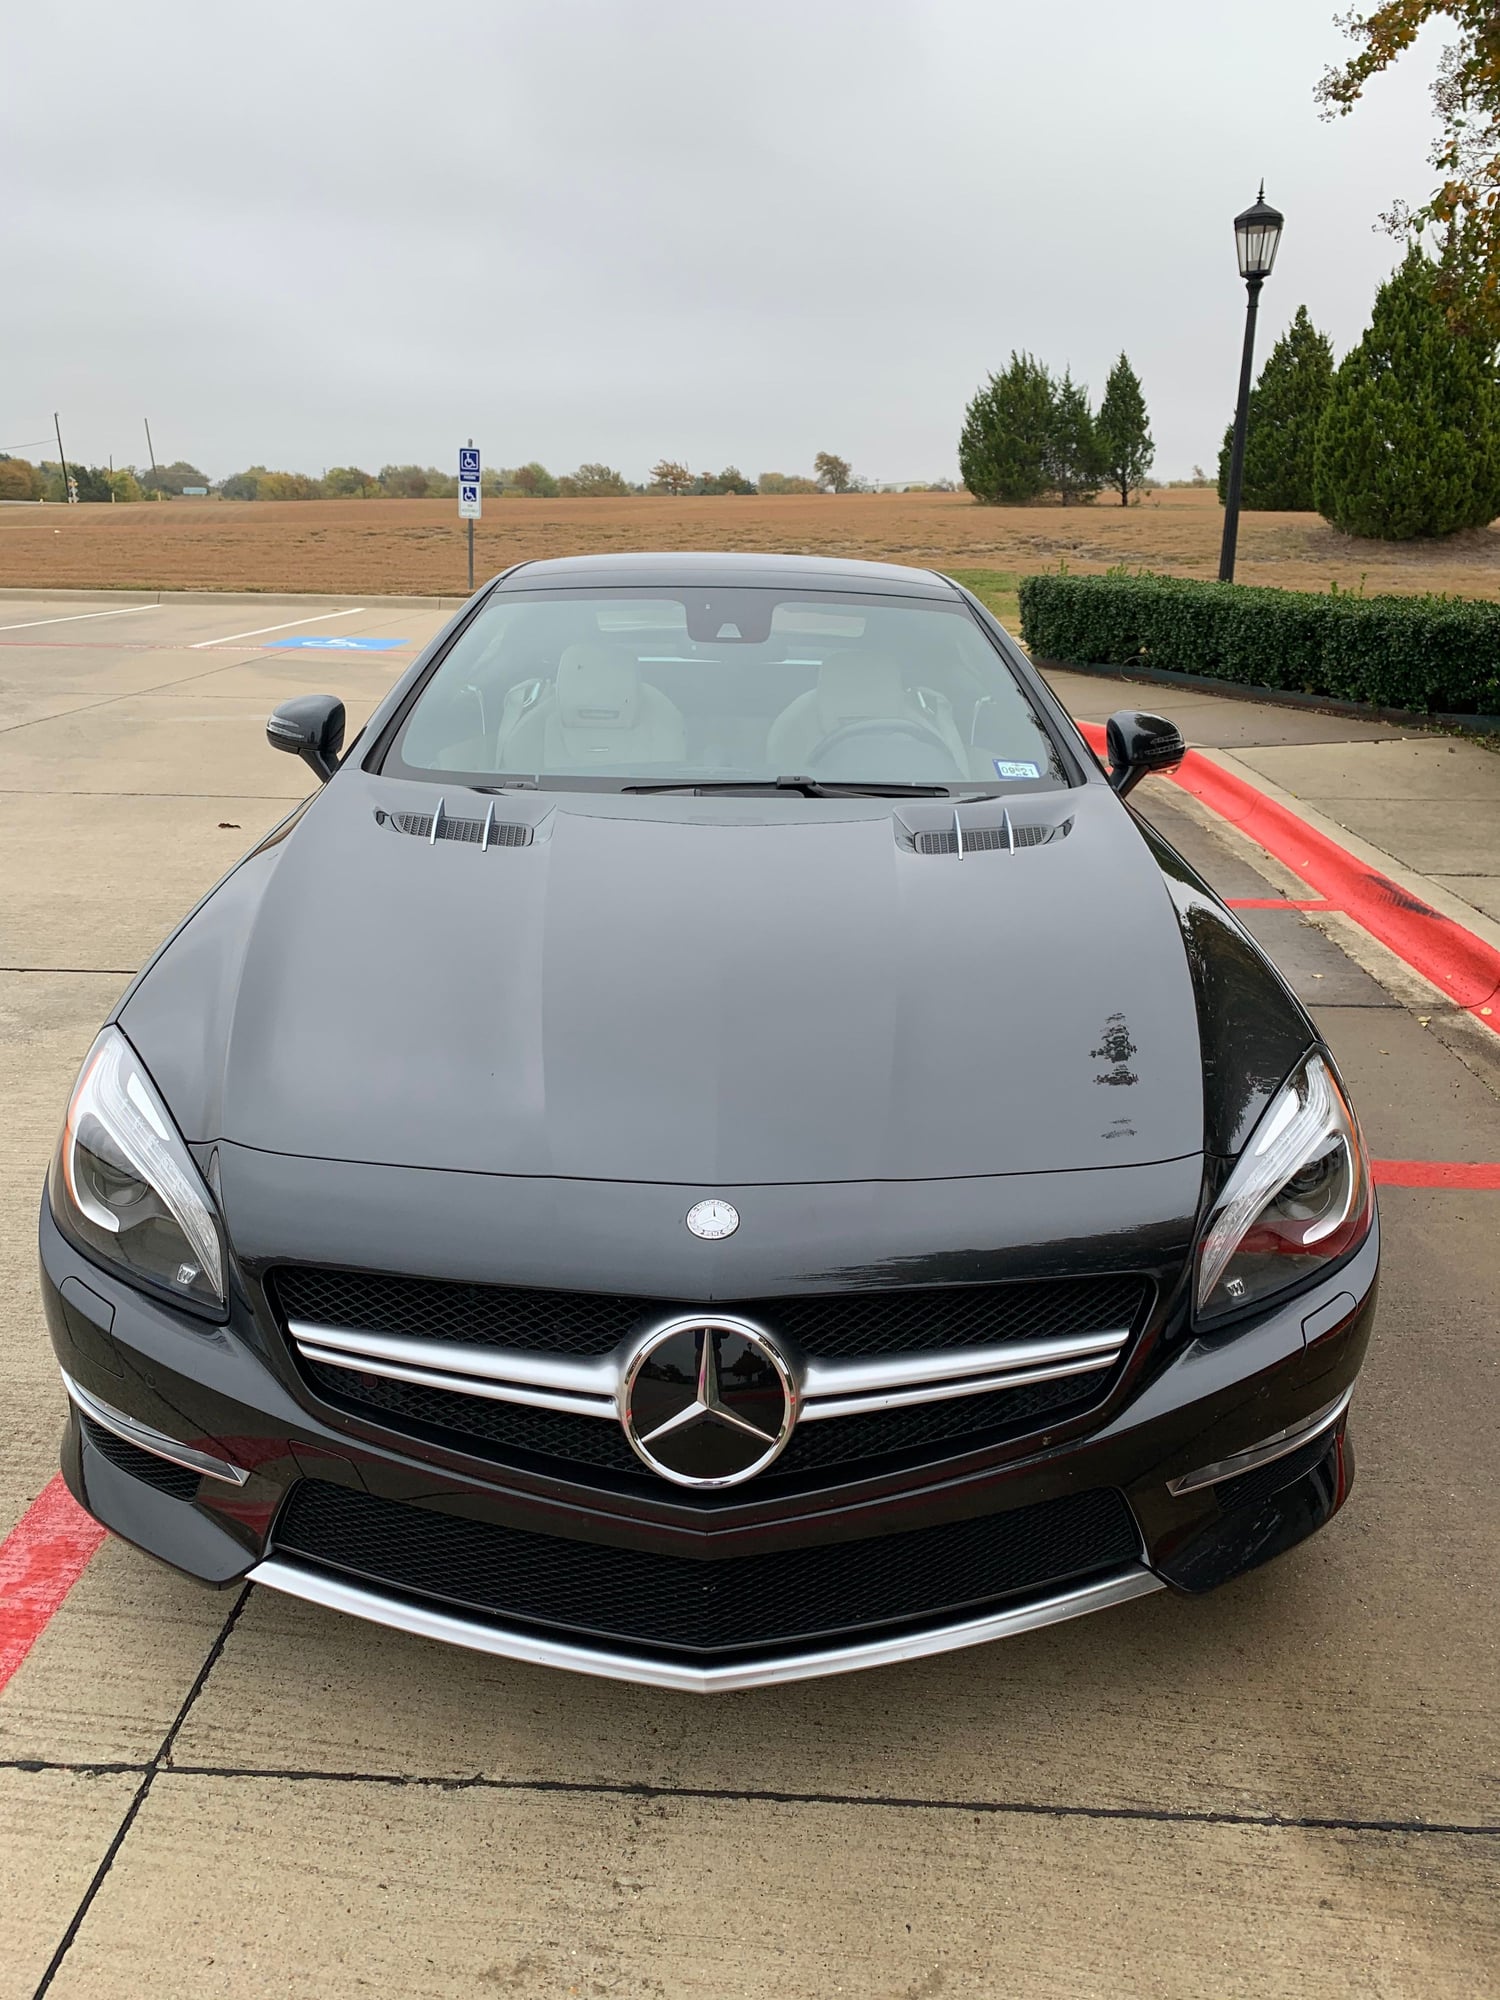 2013 Mercedes-Benz SL63 AMG - 2013 SL63 with AMG Performance Package - Used - VIN WDDJK7EA8DF018277 - 23,500 Miles - 8 cyl - 2WD - Automatic - Convertible - Black - Rockwall, TX 75087, United States